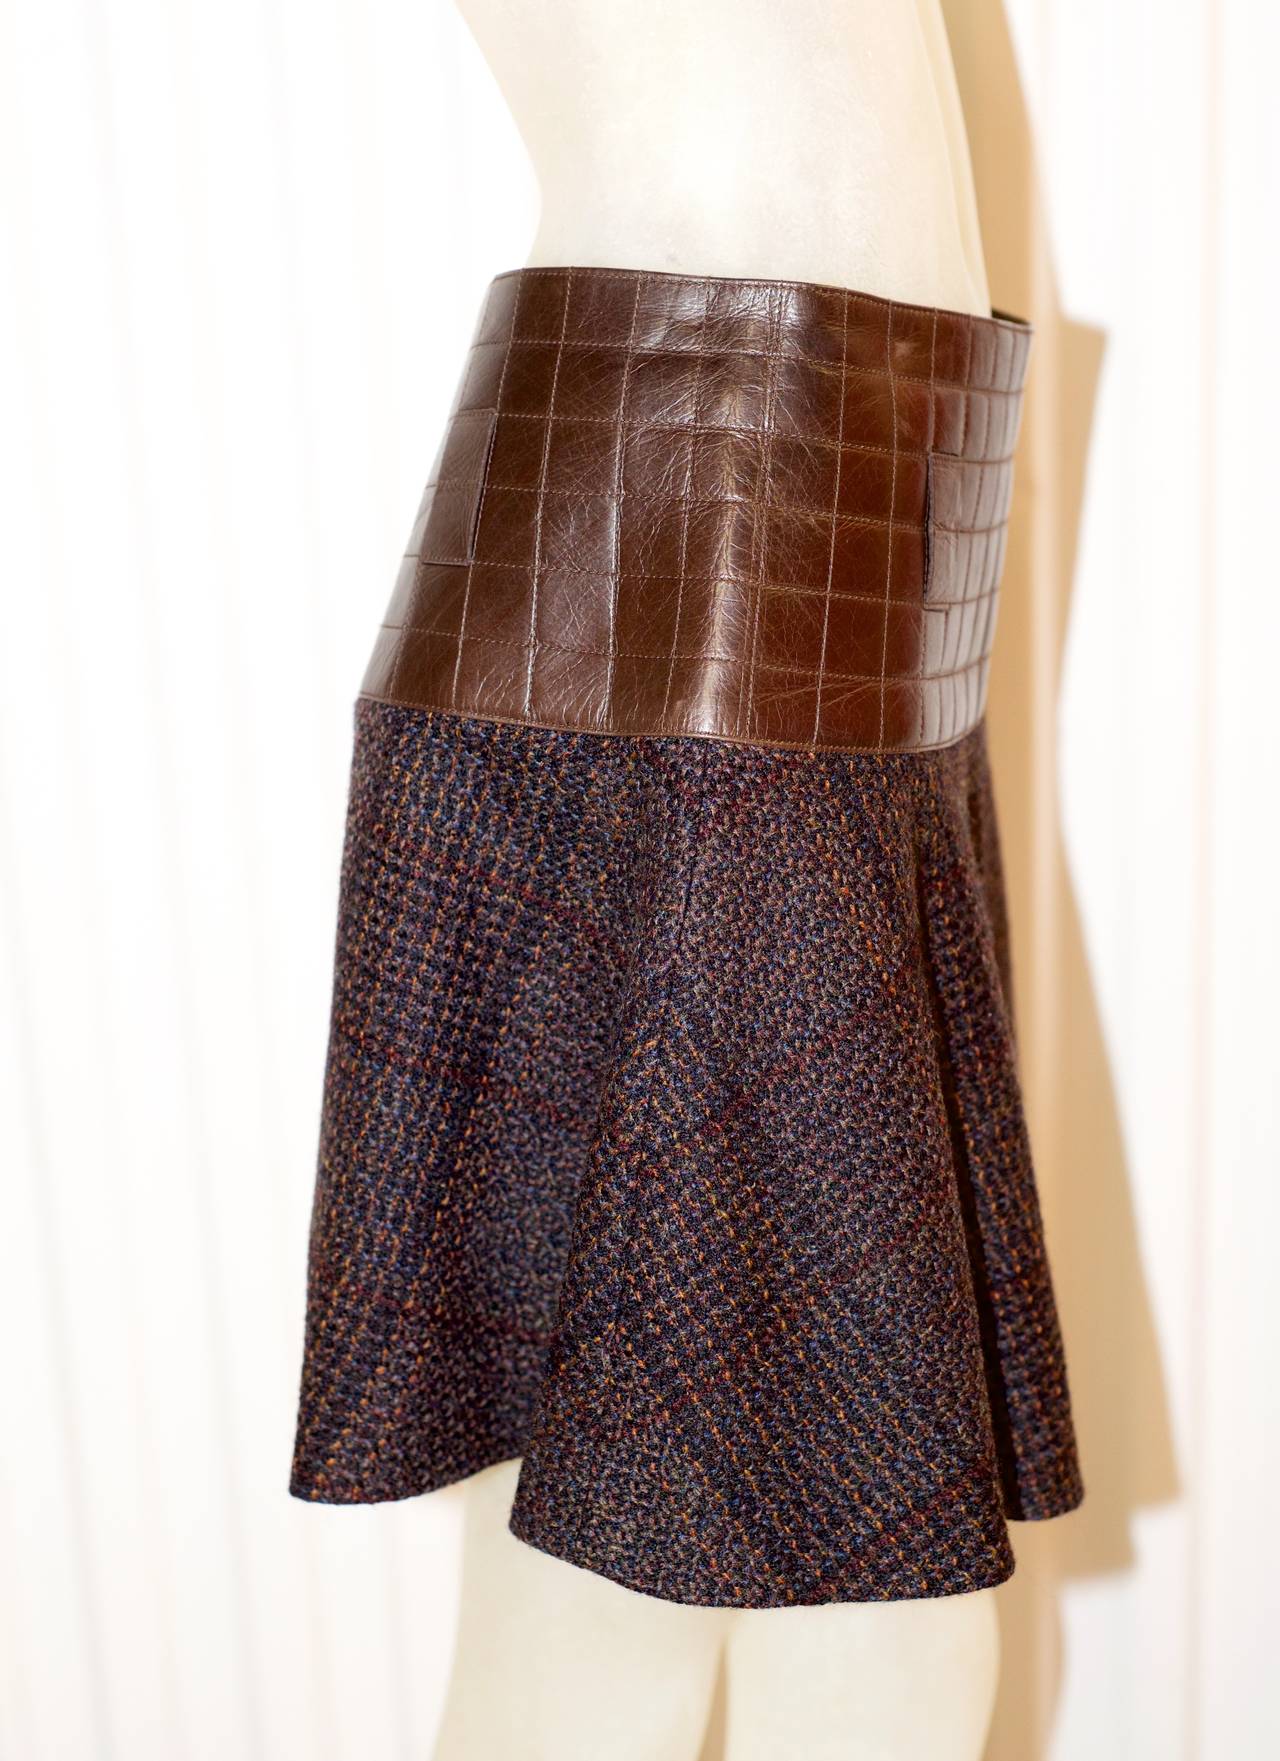 Chanel Jacket and Skirt Ensemble with Crocodile-Stamped Leather Detail For Sale 2